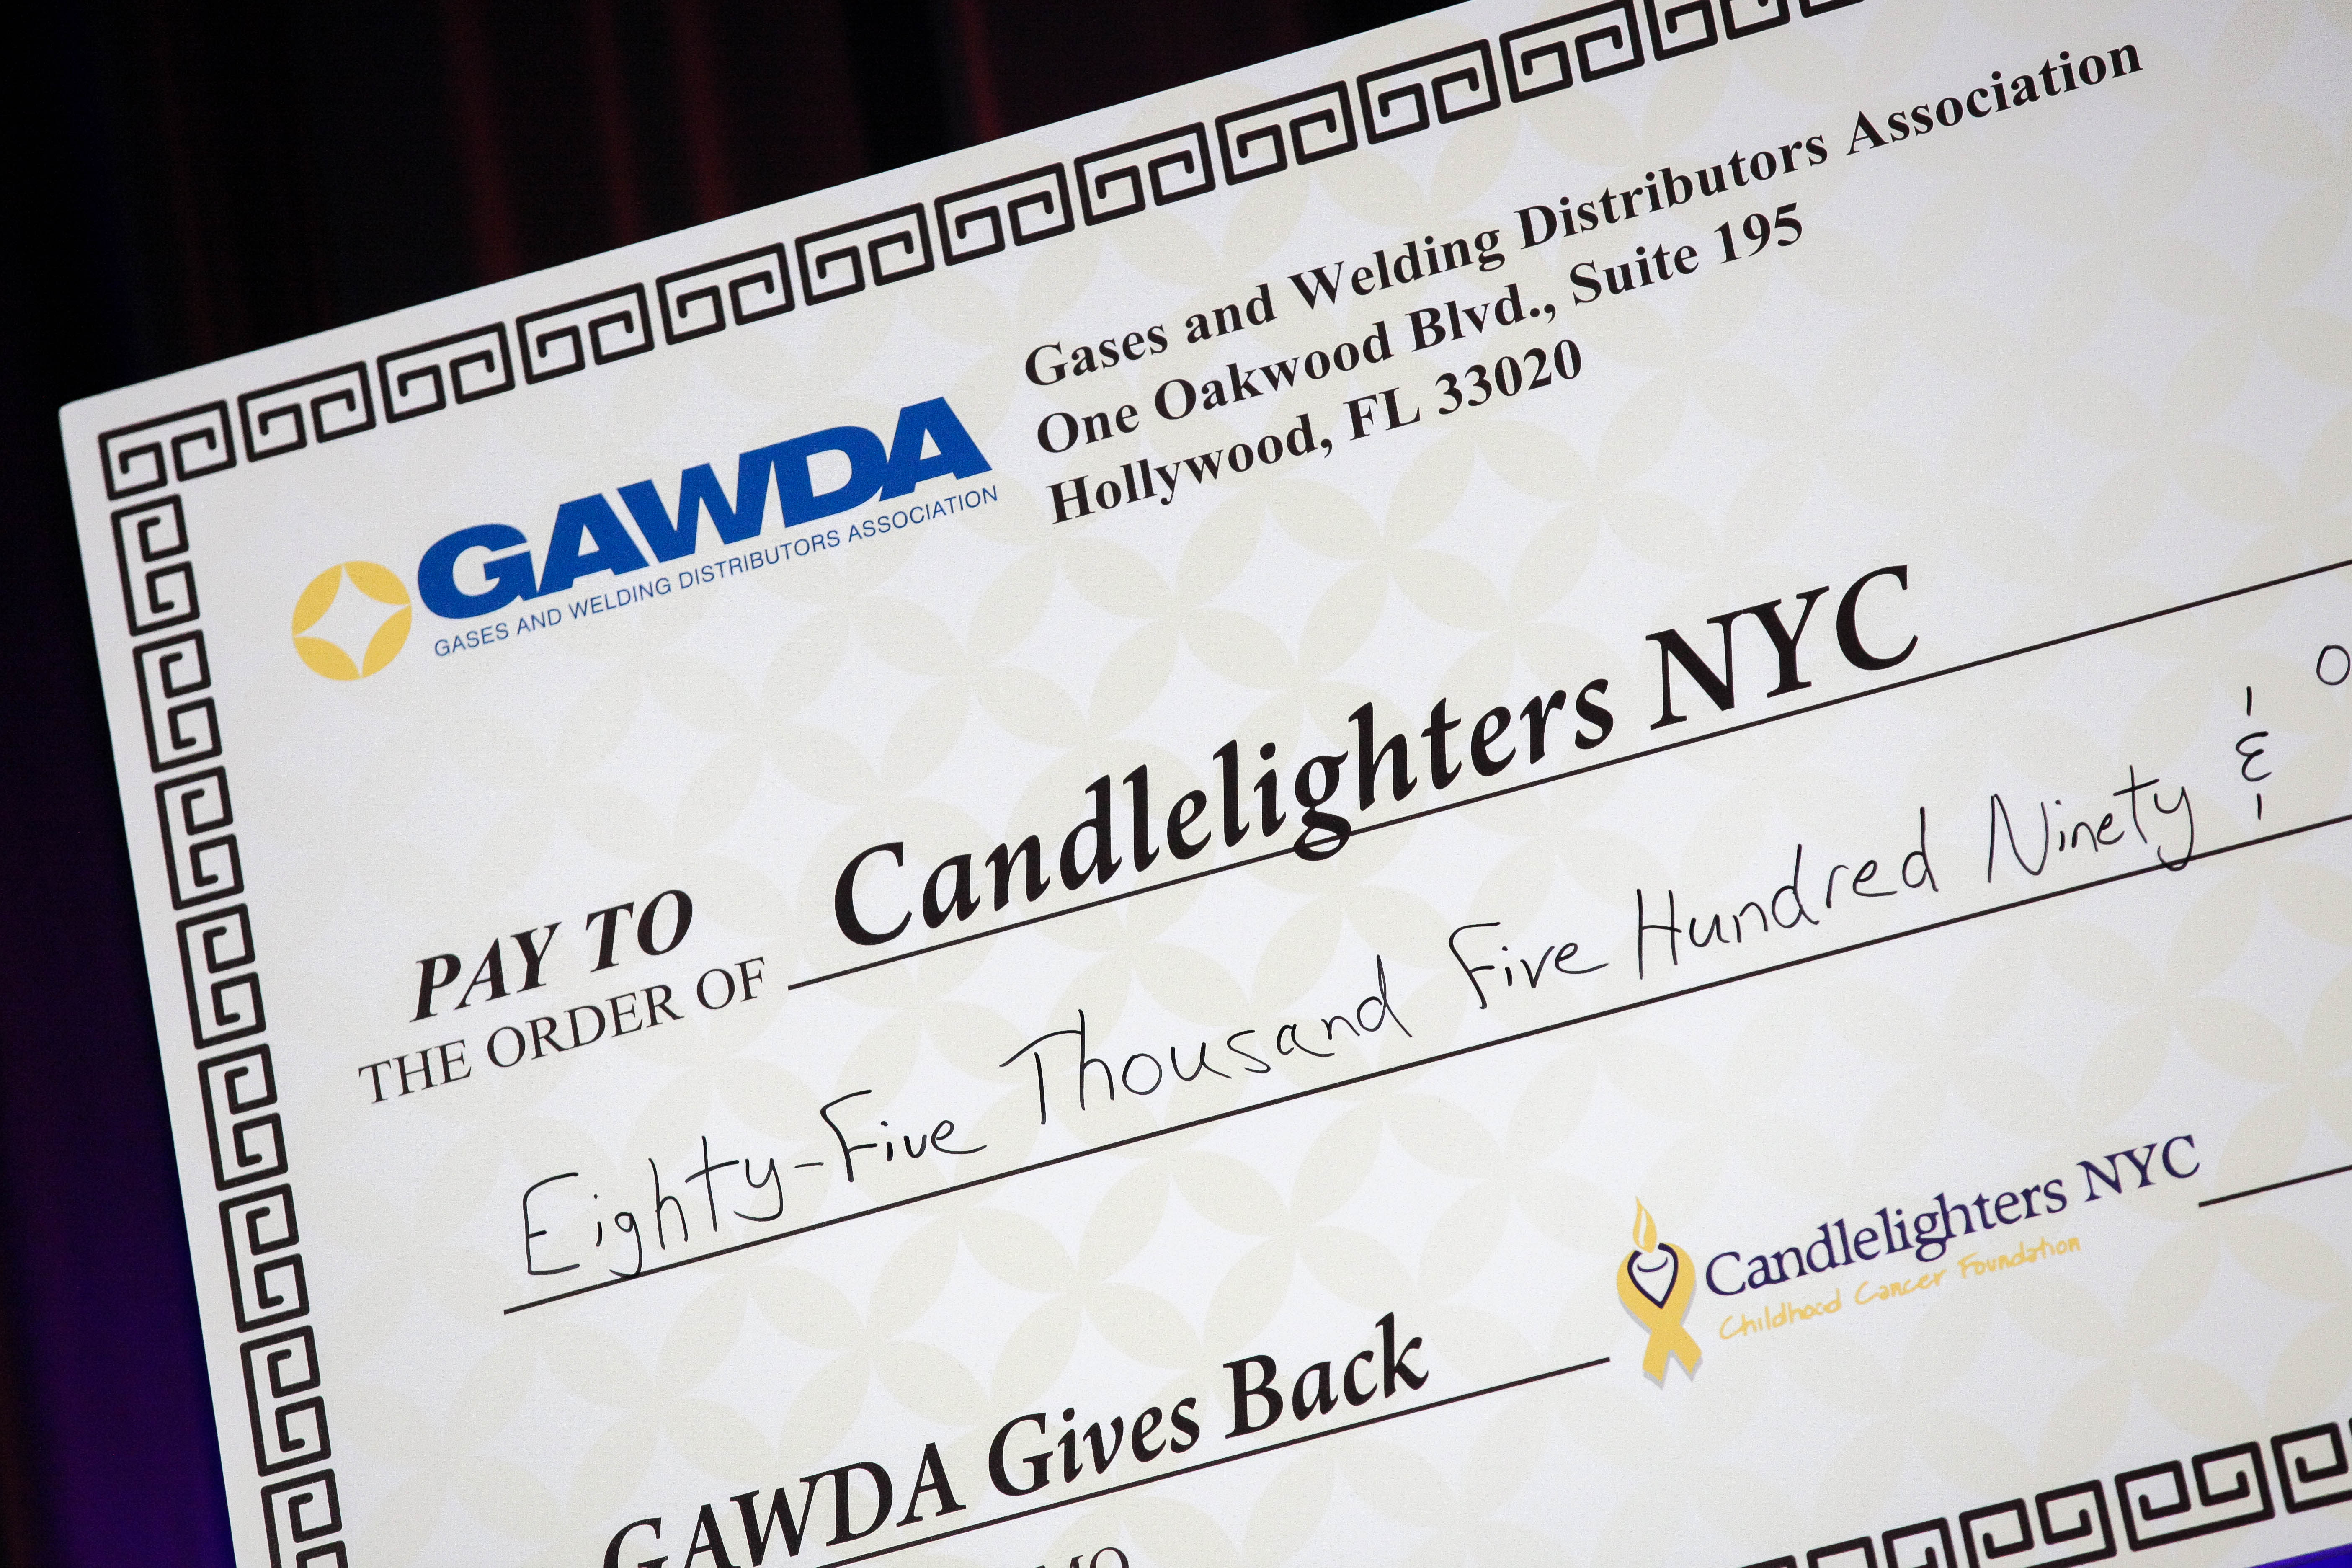 2017 Candlelighters NYC